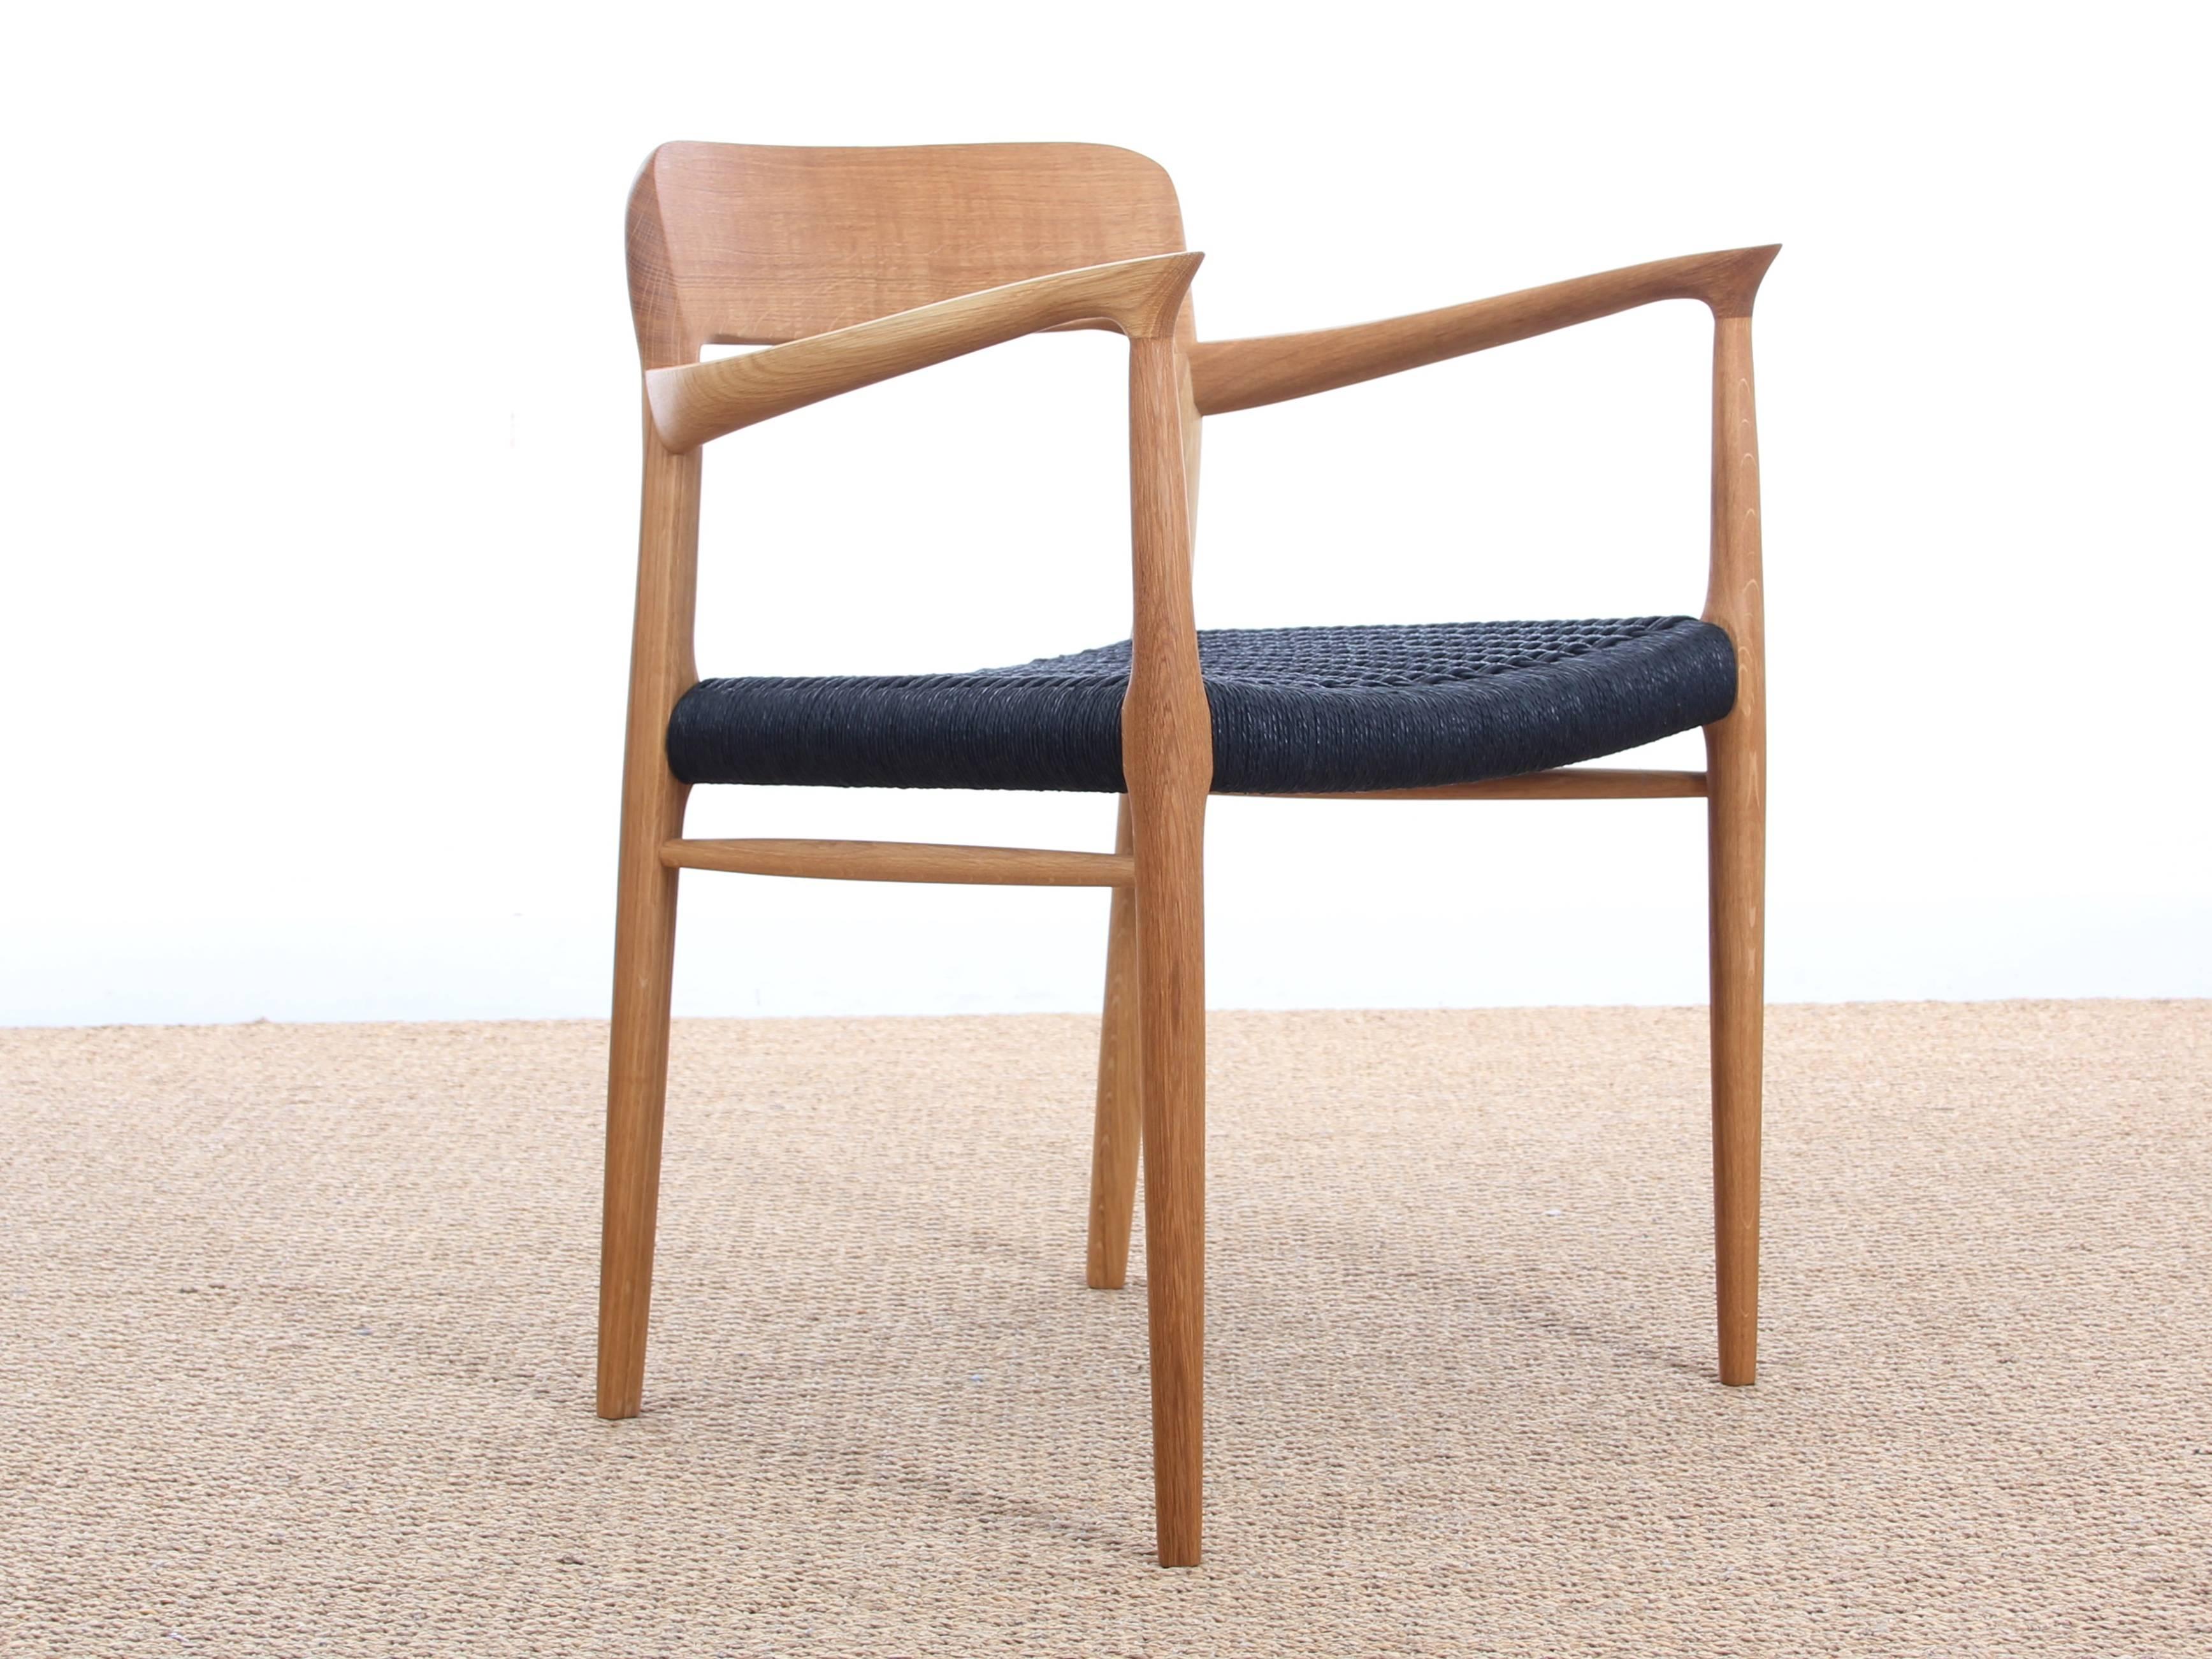 Mid-Century Modern Danish armchair in oak model 56 by Niels O. Møller. Frame in solid teak and seat in papercord. New production and still handmade in the historical Møllers workshop in Denmark.

On demand only. Delivery time 6/8 weeks. Price is